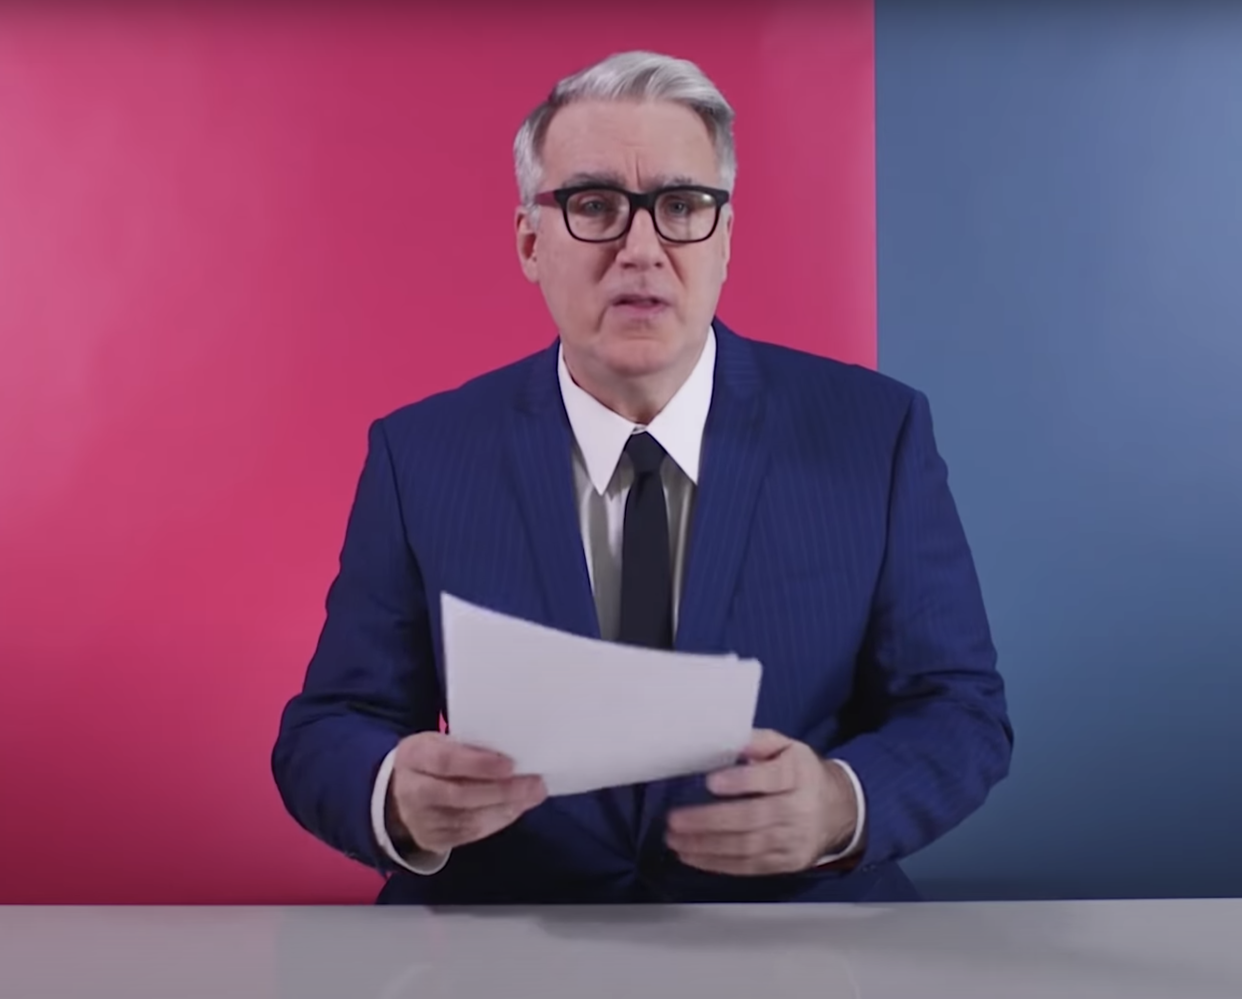 <p>Keith Olbermann implied that the US was “wasting” COVID-19 vaccines on Texas.</p> (GQ/The Resistance)